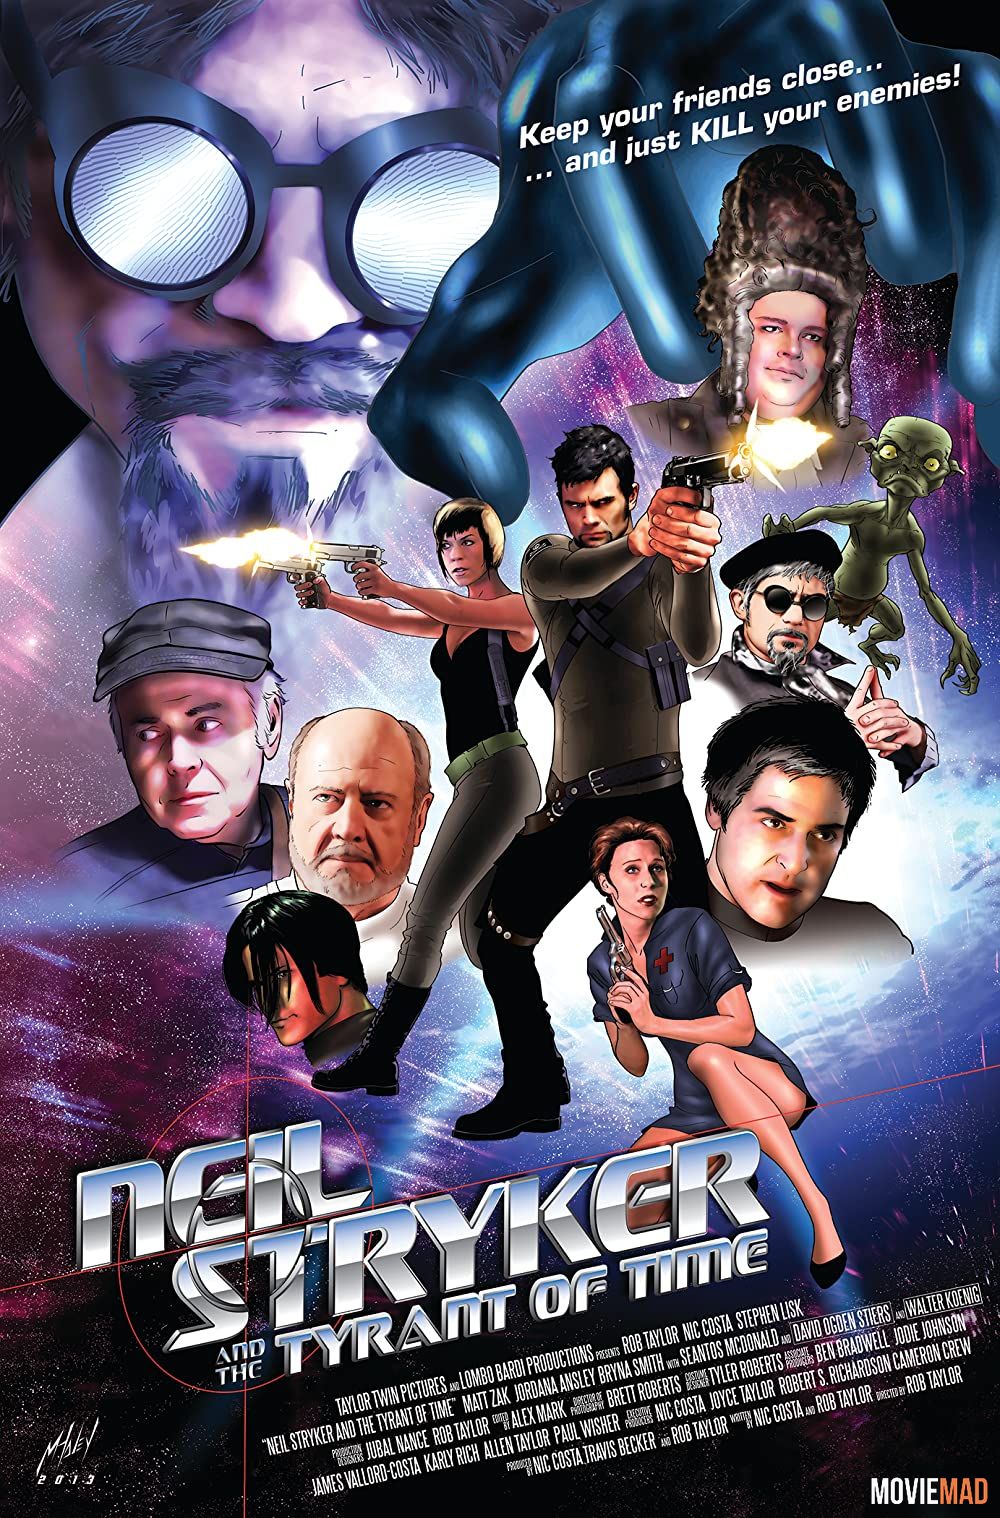 full moviesNeil Stryker and the Tyrant of Time (2017) Hindi Dubbed ORG HDRip Full Movie 720p 480p